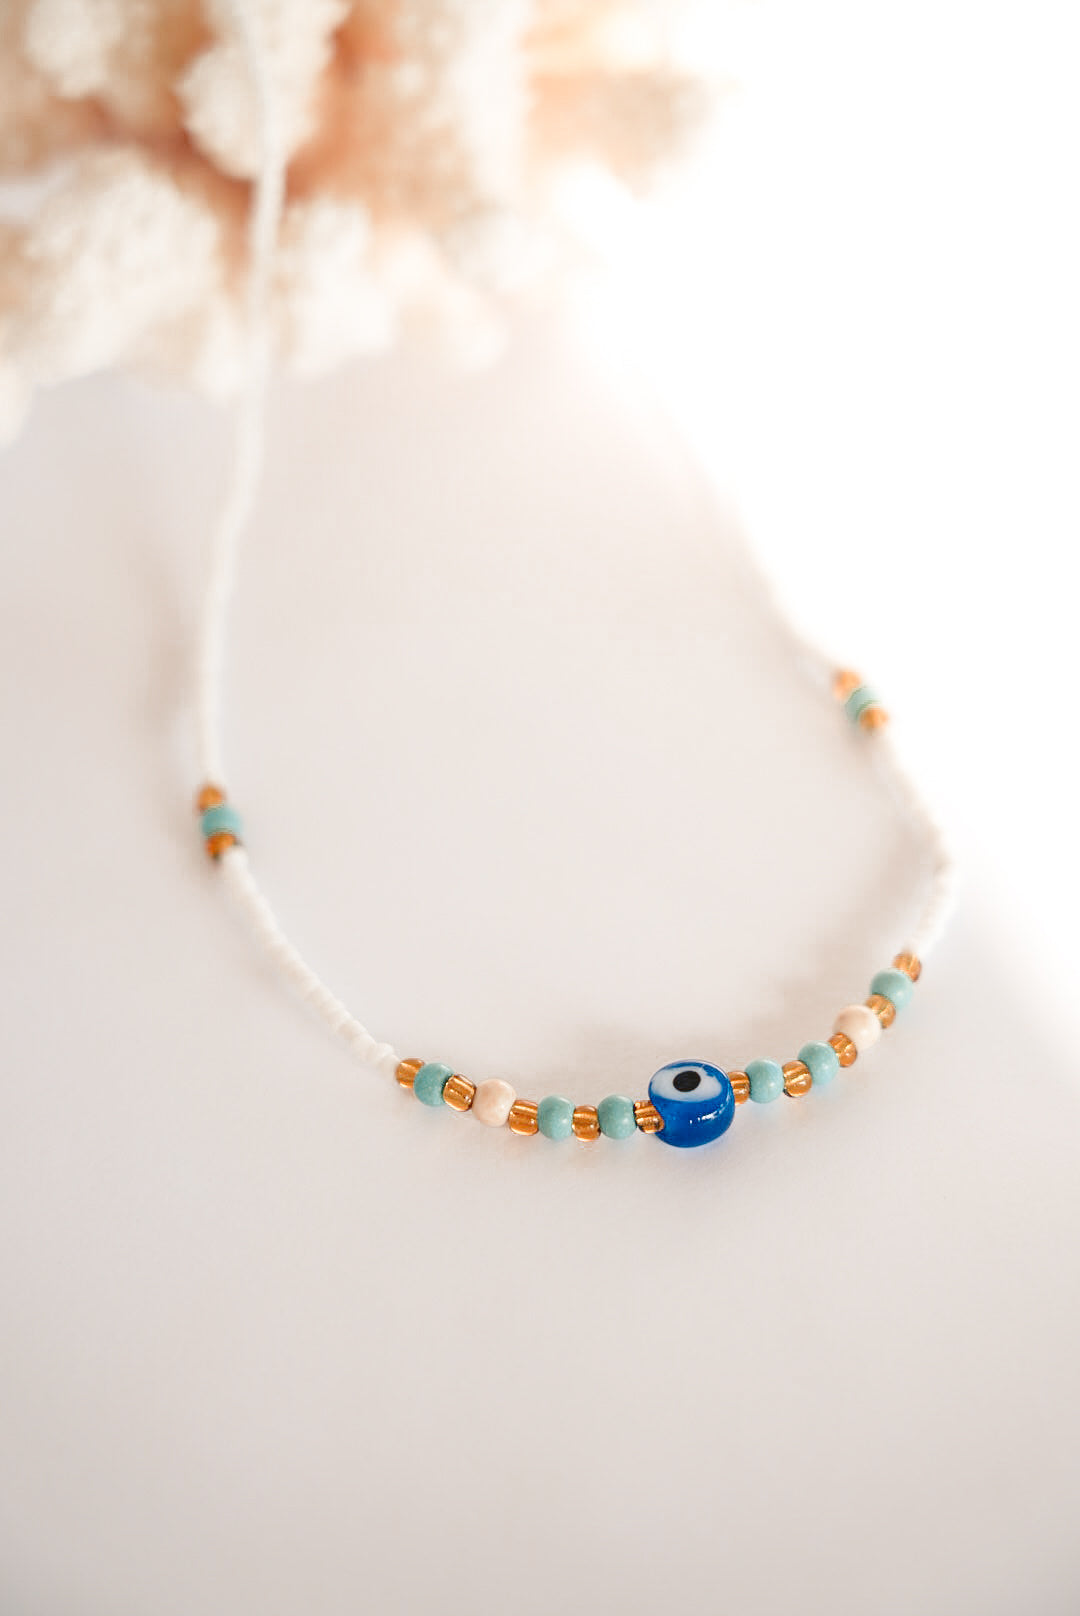 THE EYE BEADED NECKLACE